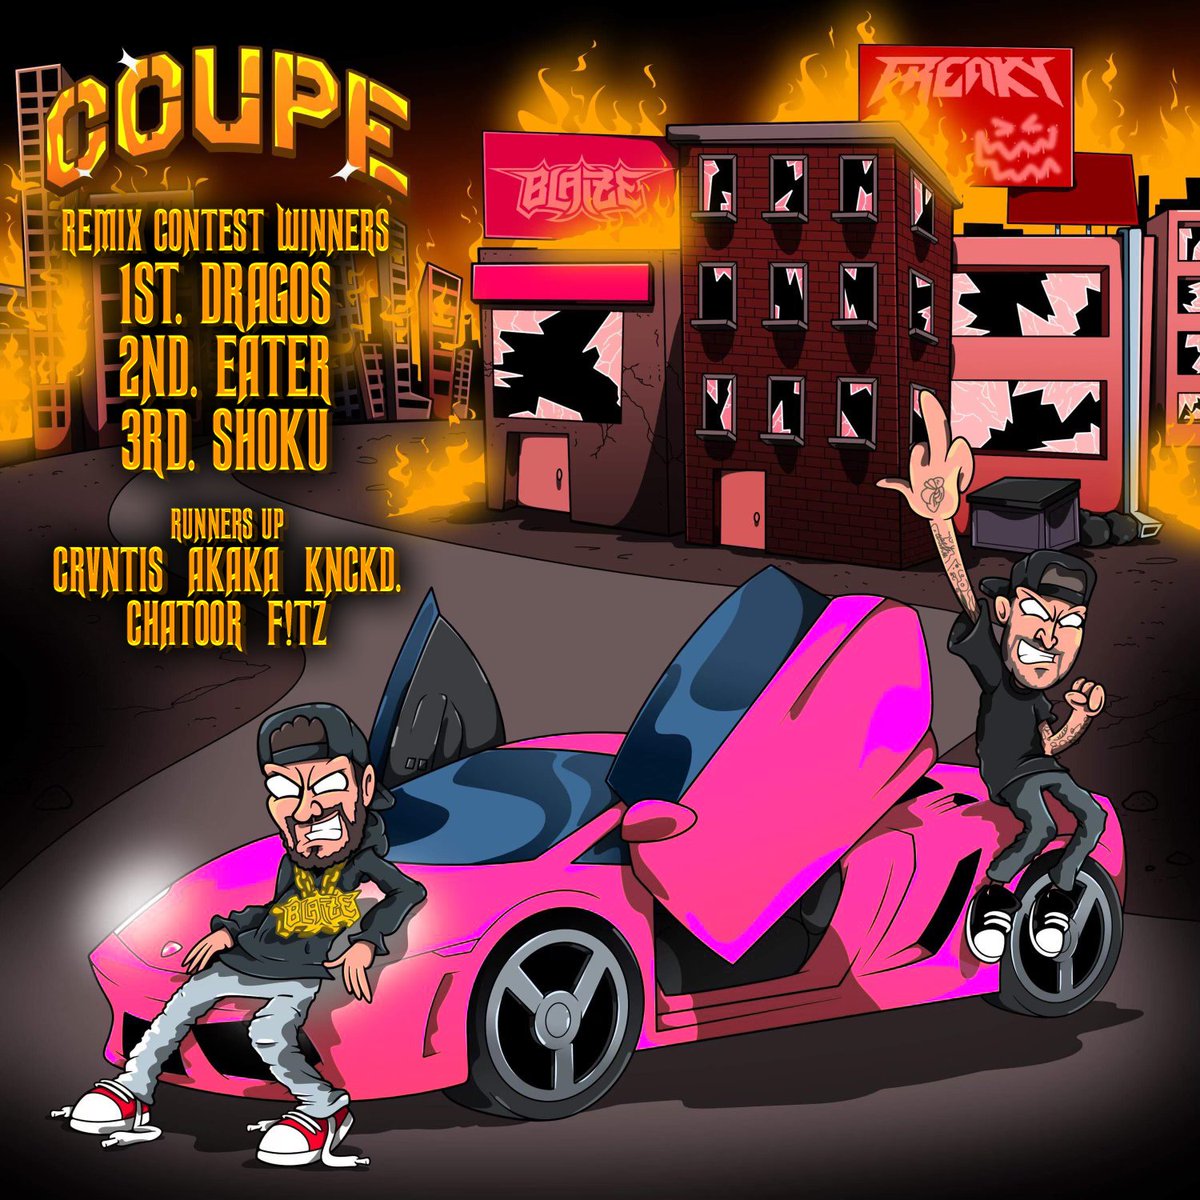 THE WINNERS OF THE COUPE REMIX CONTEST ARE 1st @itsdragos 2nd @eatermusic 3rd @shokumusic Runners Up @crvntis Akaka @knckd3 @itschatoor F!TZ VIPs BLAIZE @FREAKY_Music All mentioned artists will be on the official remix EP that will be released on @GridlockRecs 8/29